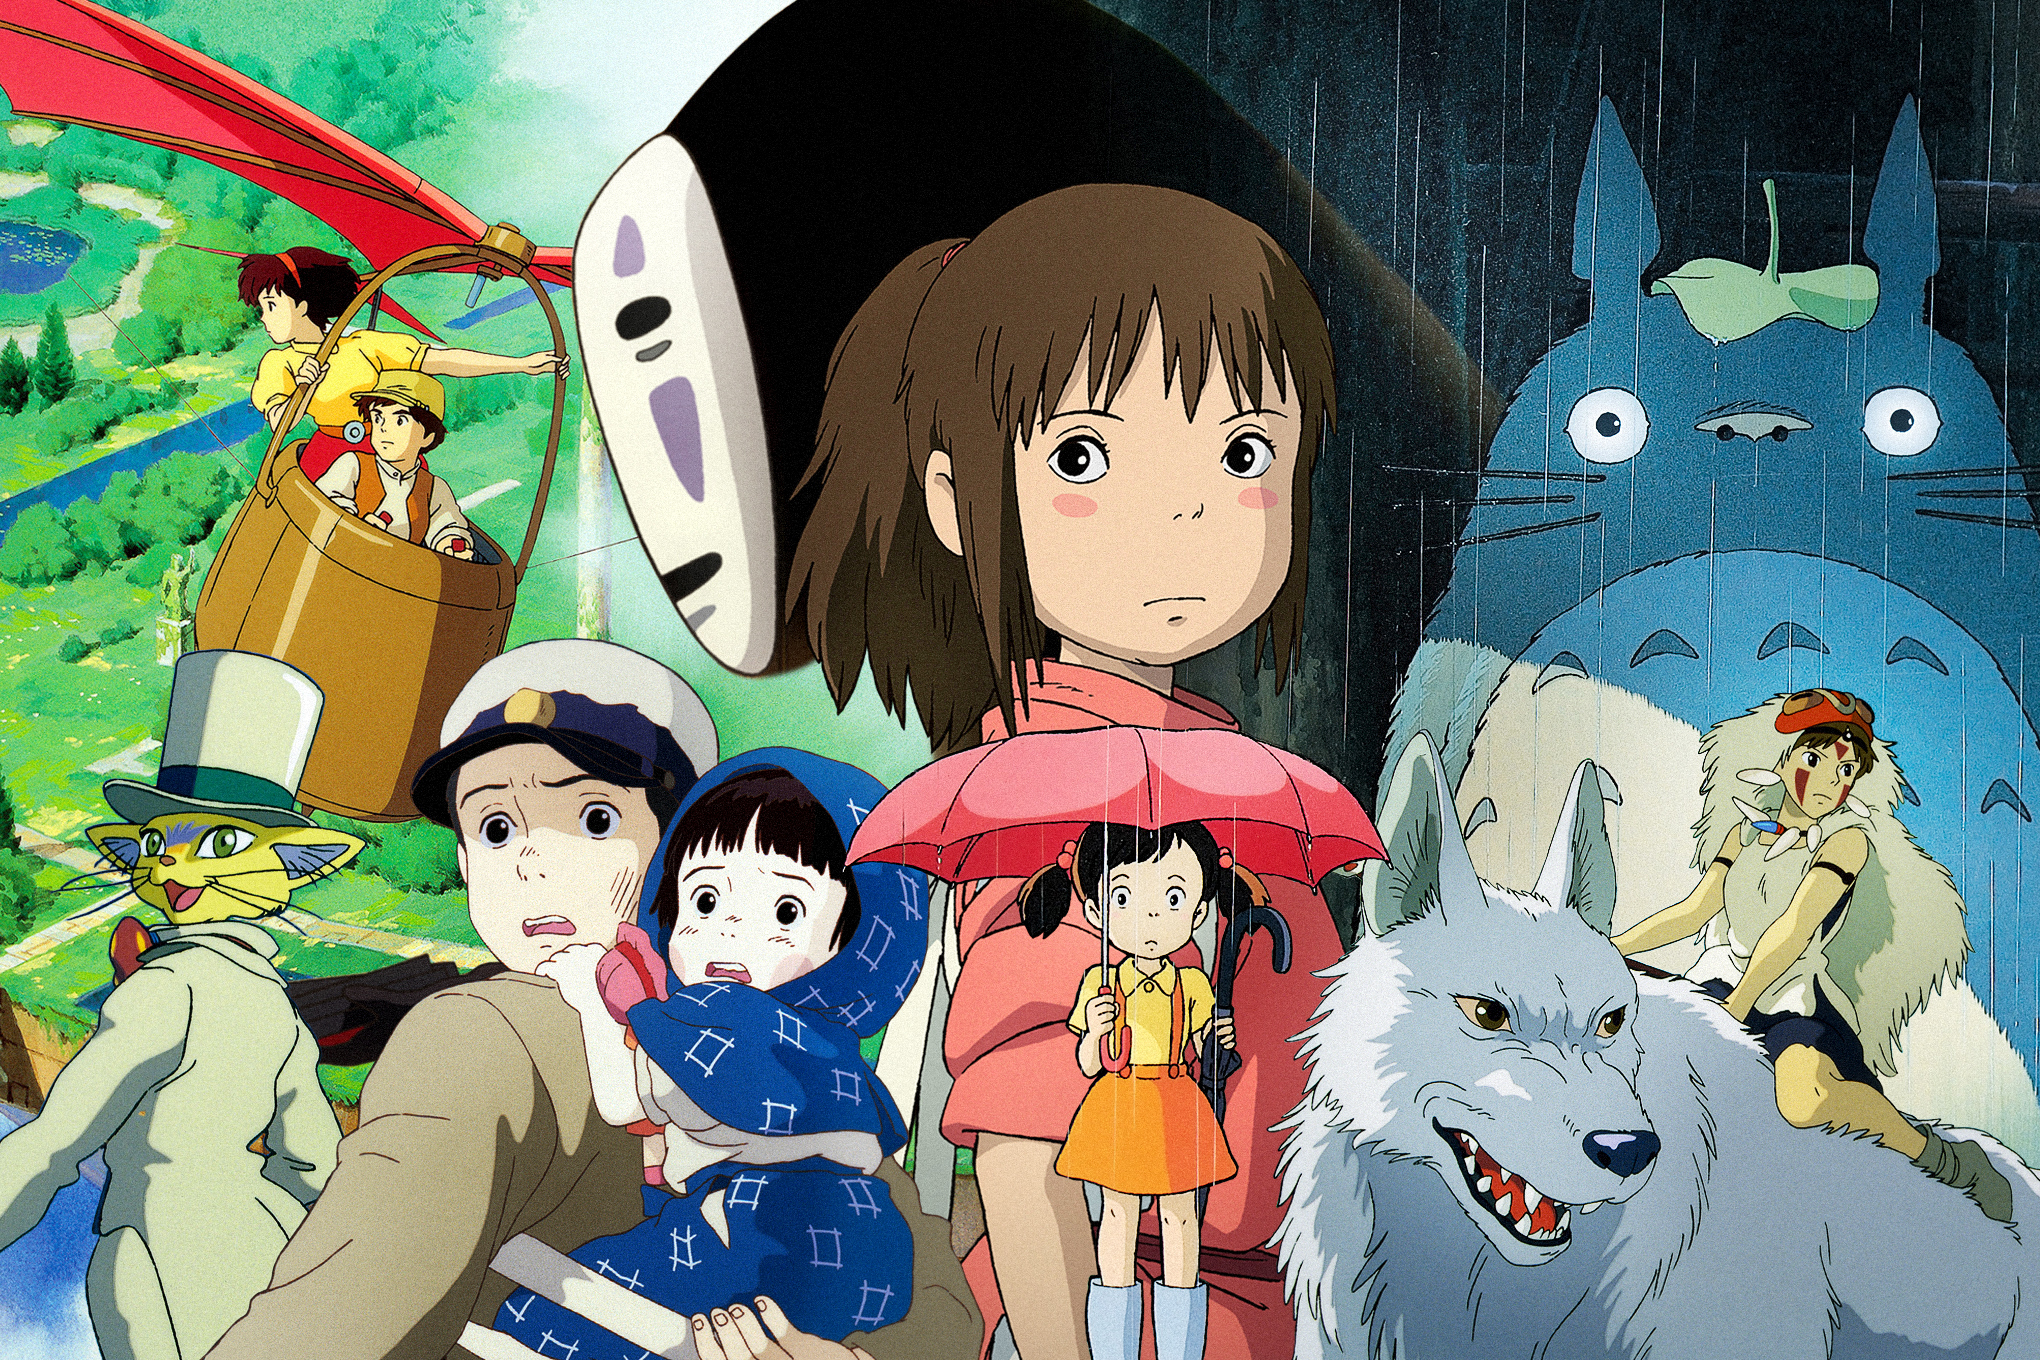 A collage of animated characters from Studio Ghibli movies